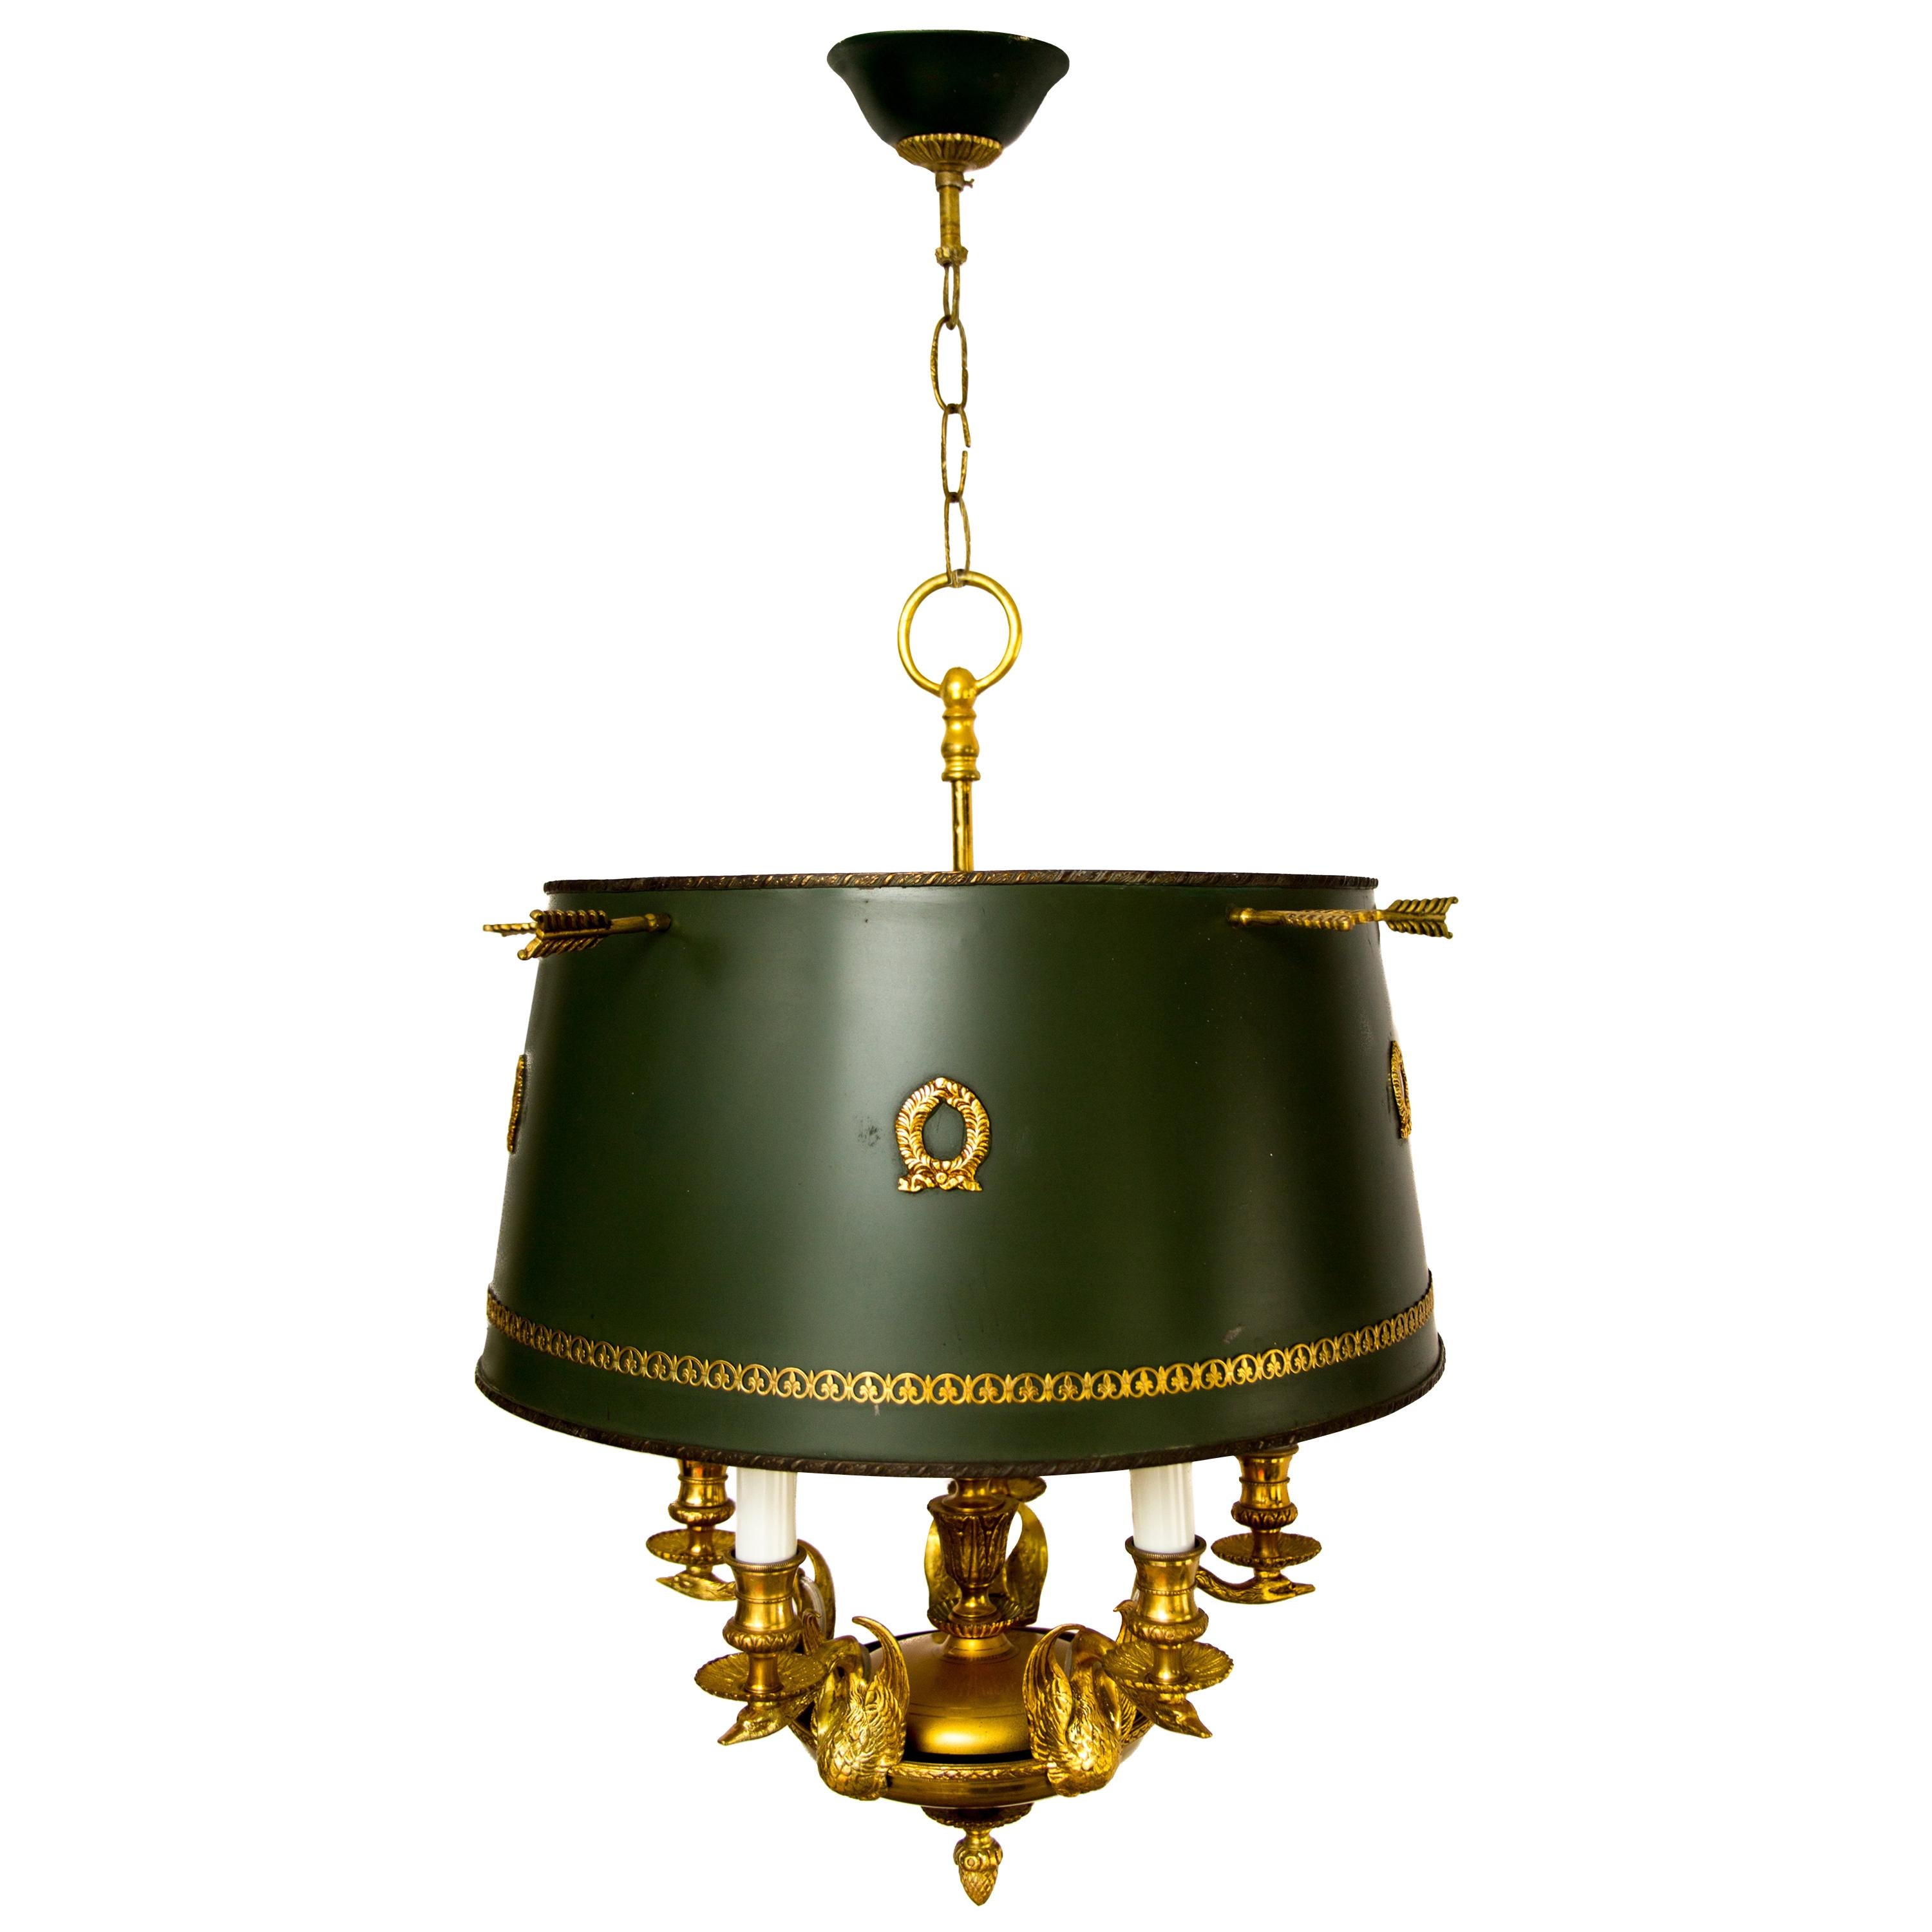 French Empire Style Gilt Bronze and Green Painted Five-Light Tole Chandelier